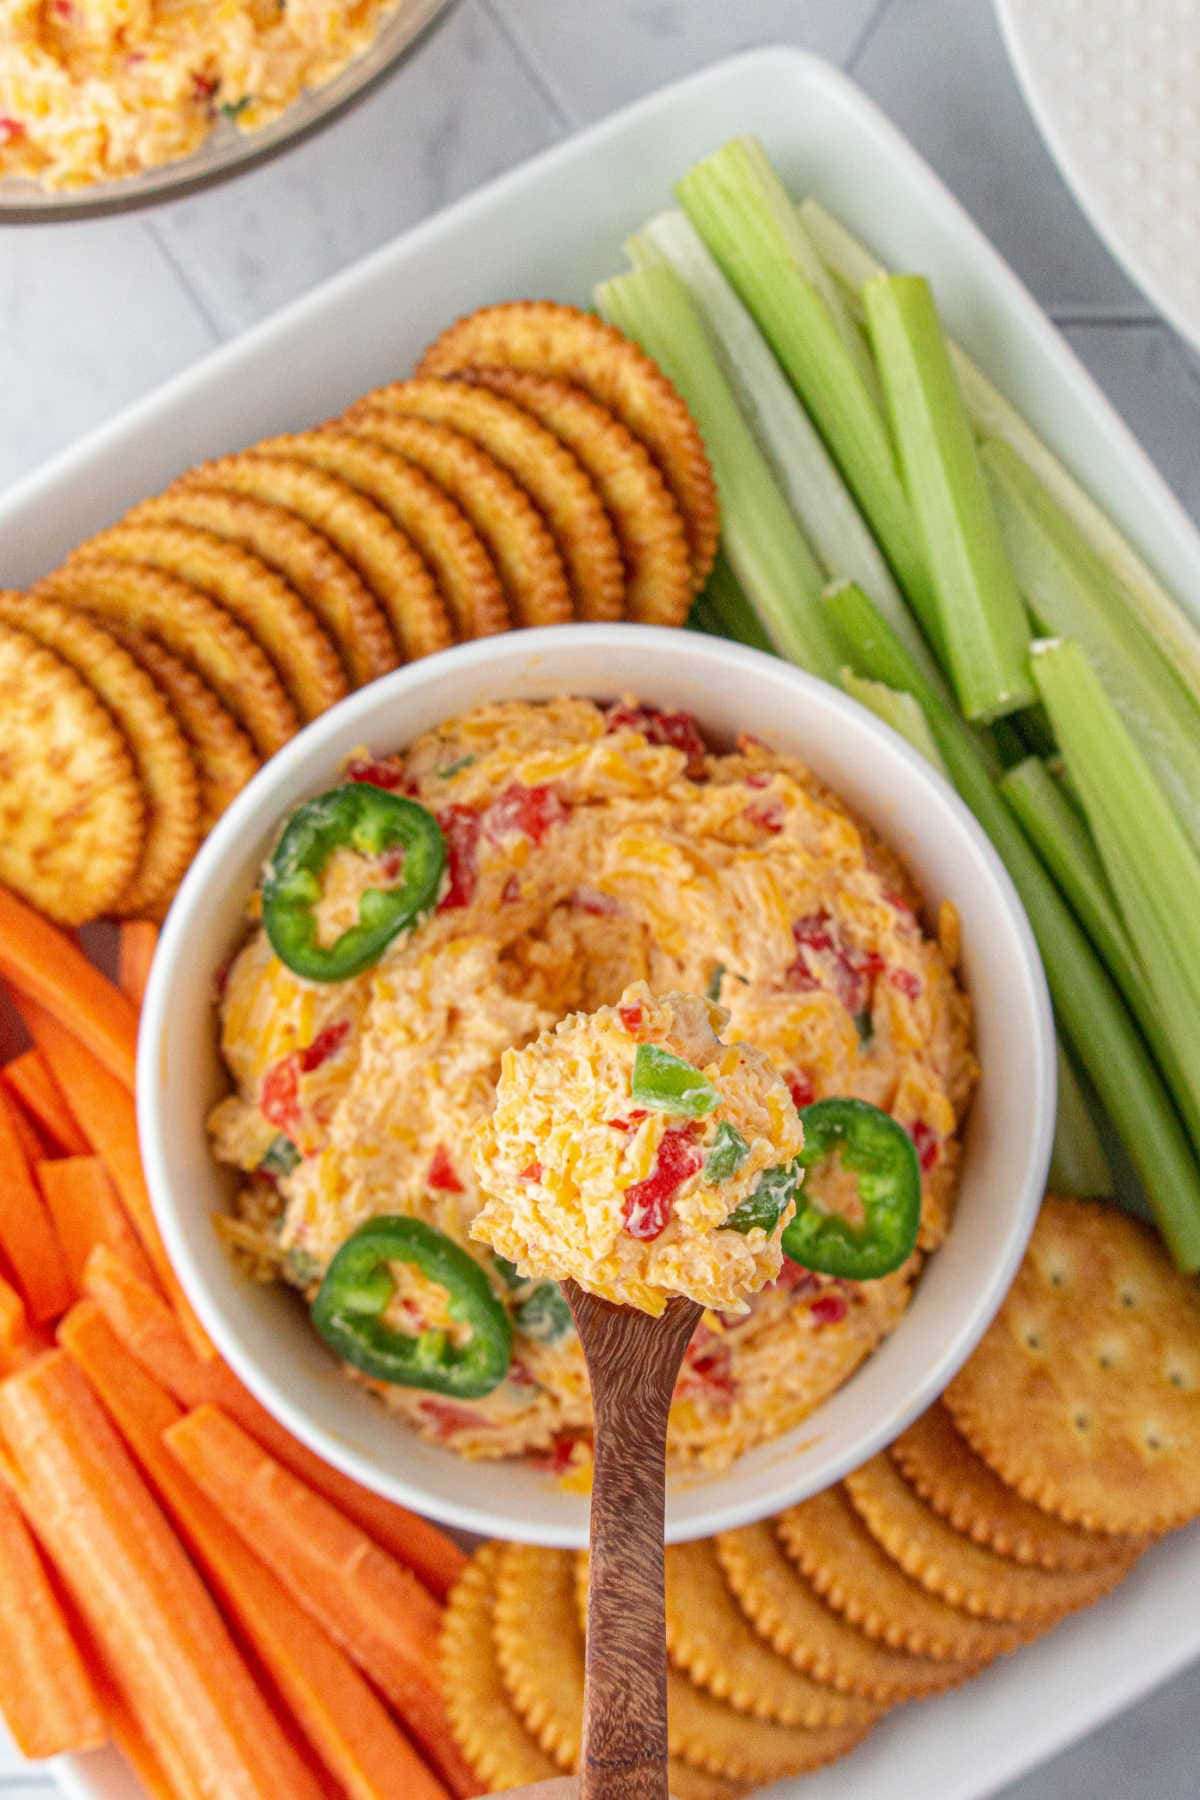 Overhead view of a bowl of pimento cheese surrounded by crackers and veggies.